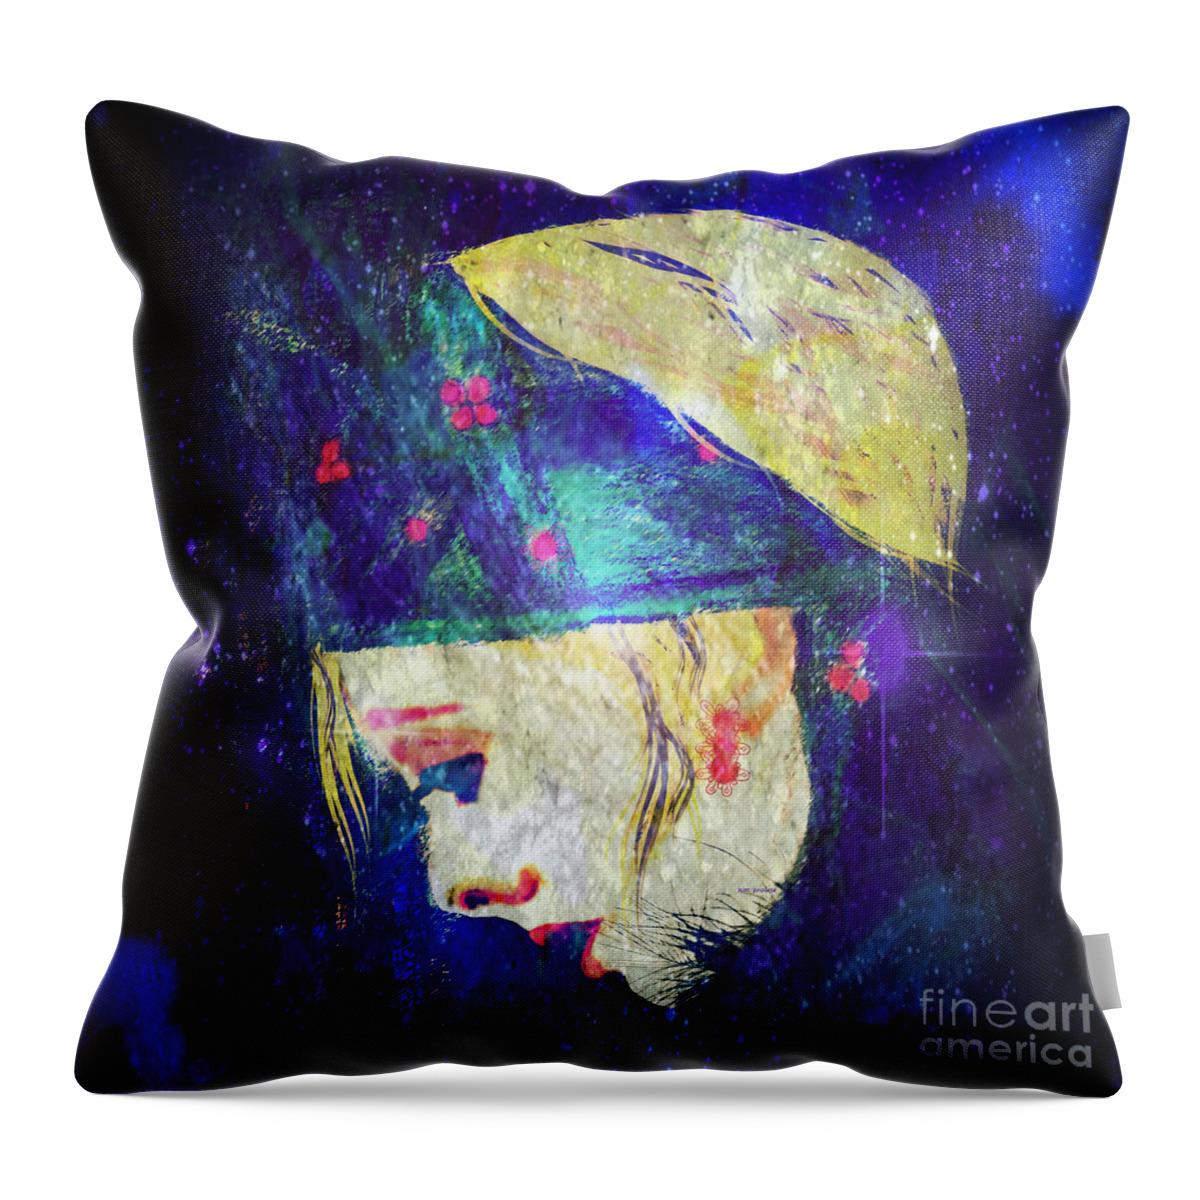 Portrait Throw Pillow featuring the mixed media Daisy Star by Kim Prowse